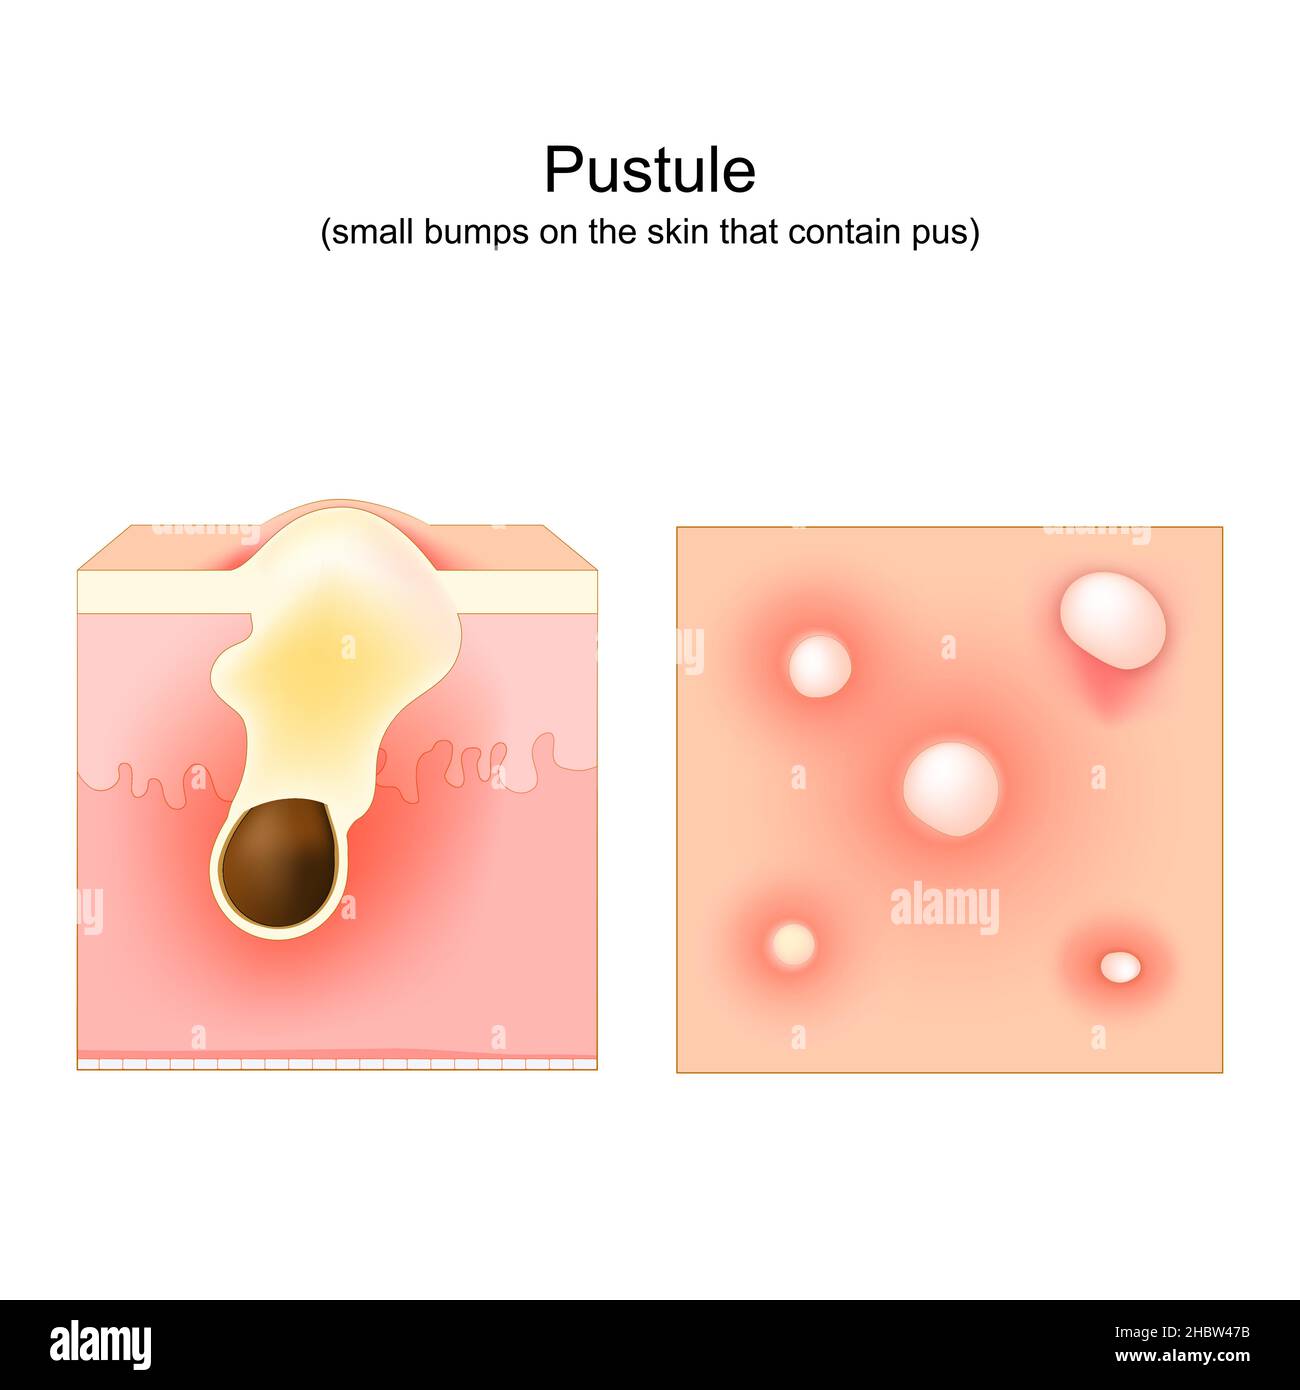 Acne. Pustule is small bump on the skin that contain pus. Cross-section of a human skin. Hair follicle with pus. Top view of the skin with pimples Stock Vector